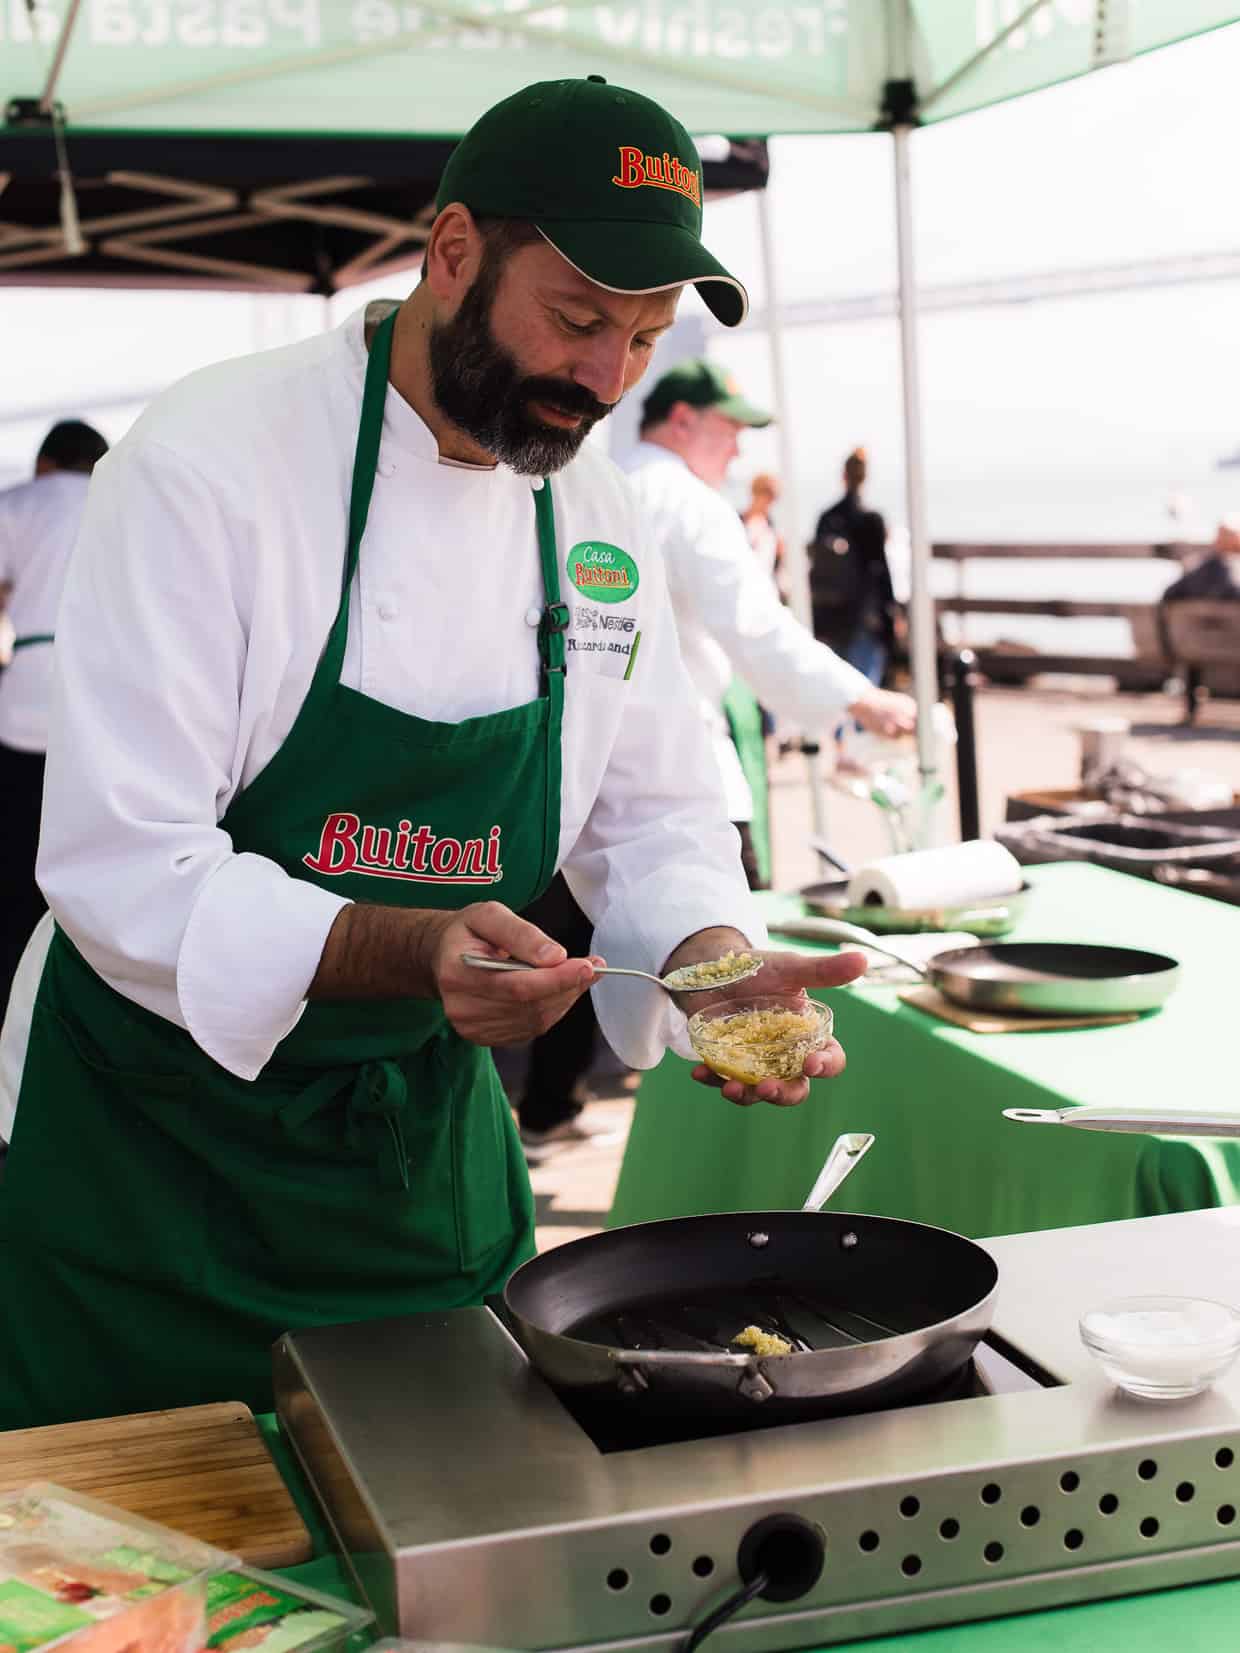 Buitoni Chef Riccardo Landi transforming Buitoni refrigerated vegetable and herb infused pastas into a simple dish using ingredients sourced from the farmer’s market.